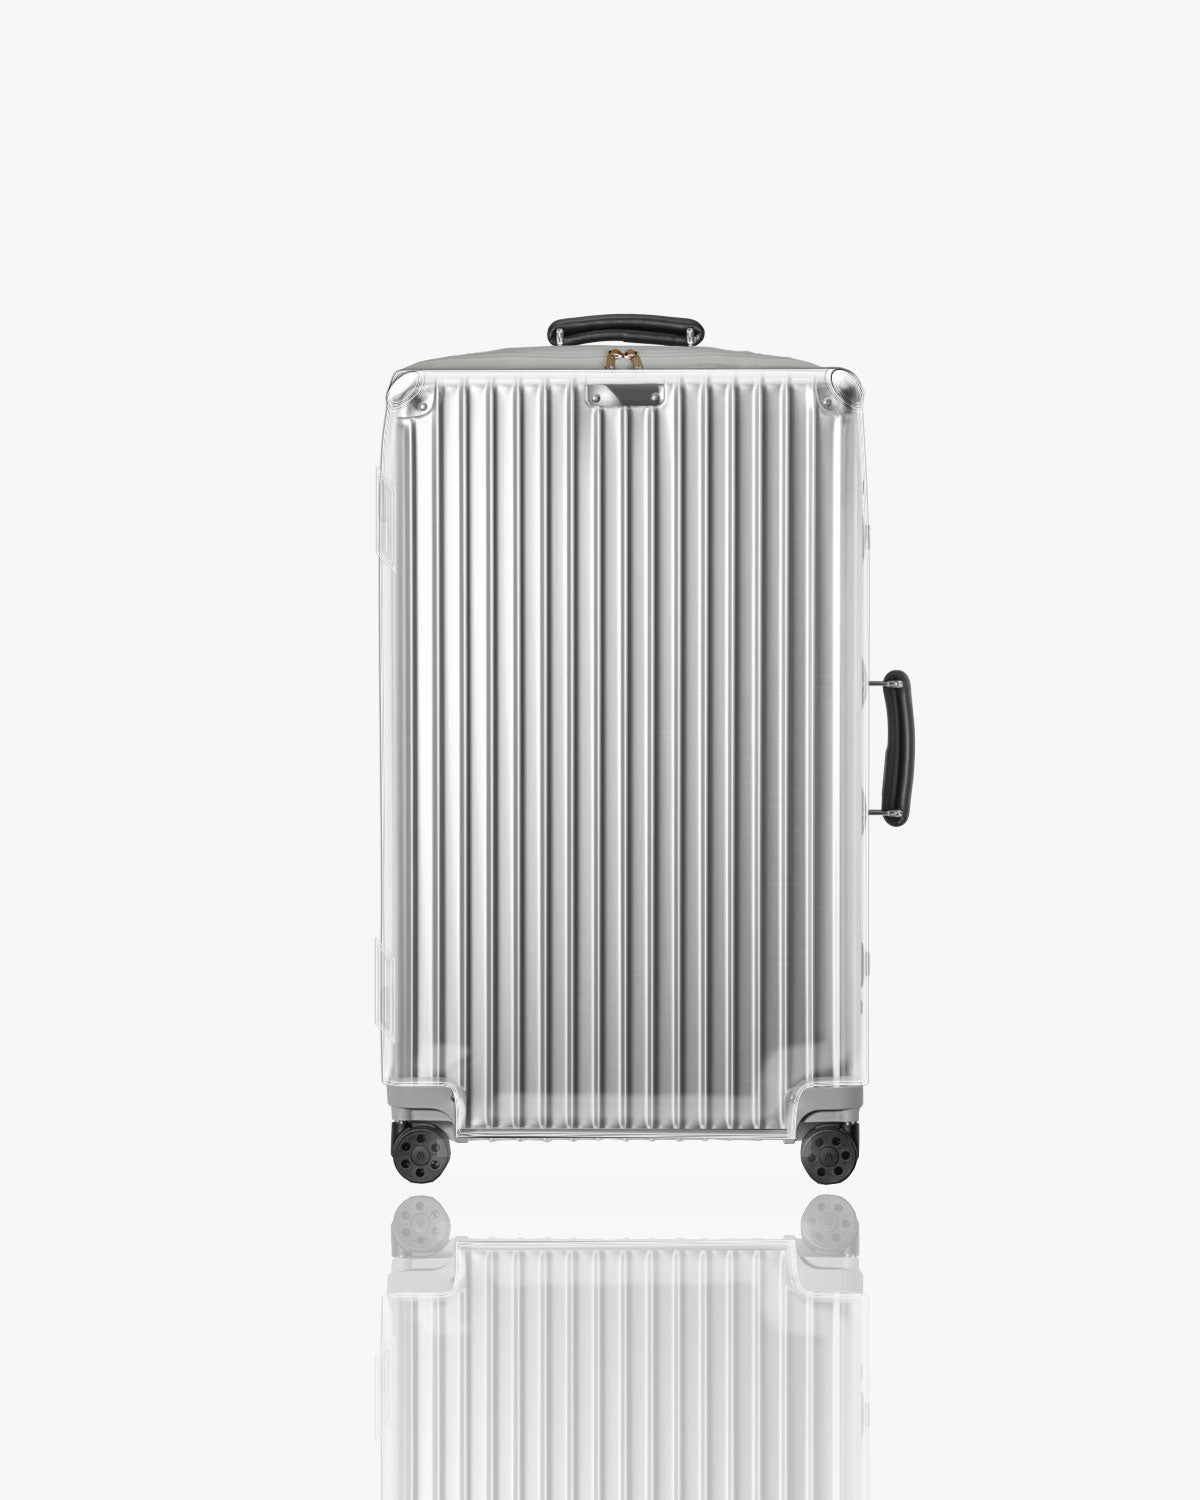 973 CLASSIC - Clear Protective Luggage Cover